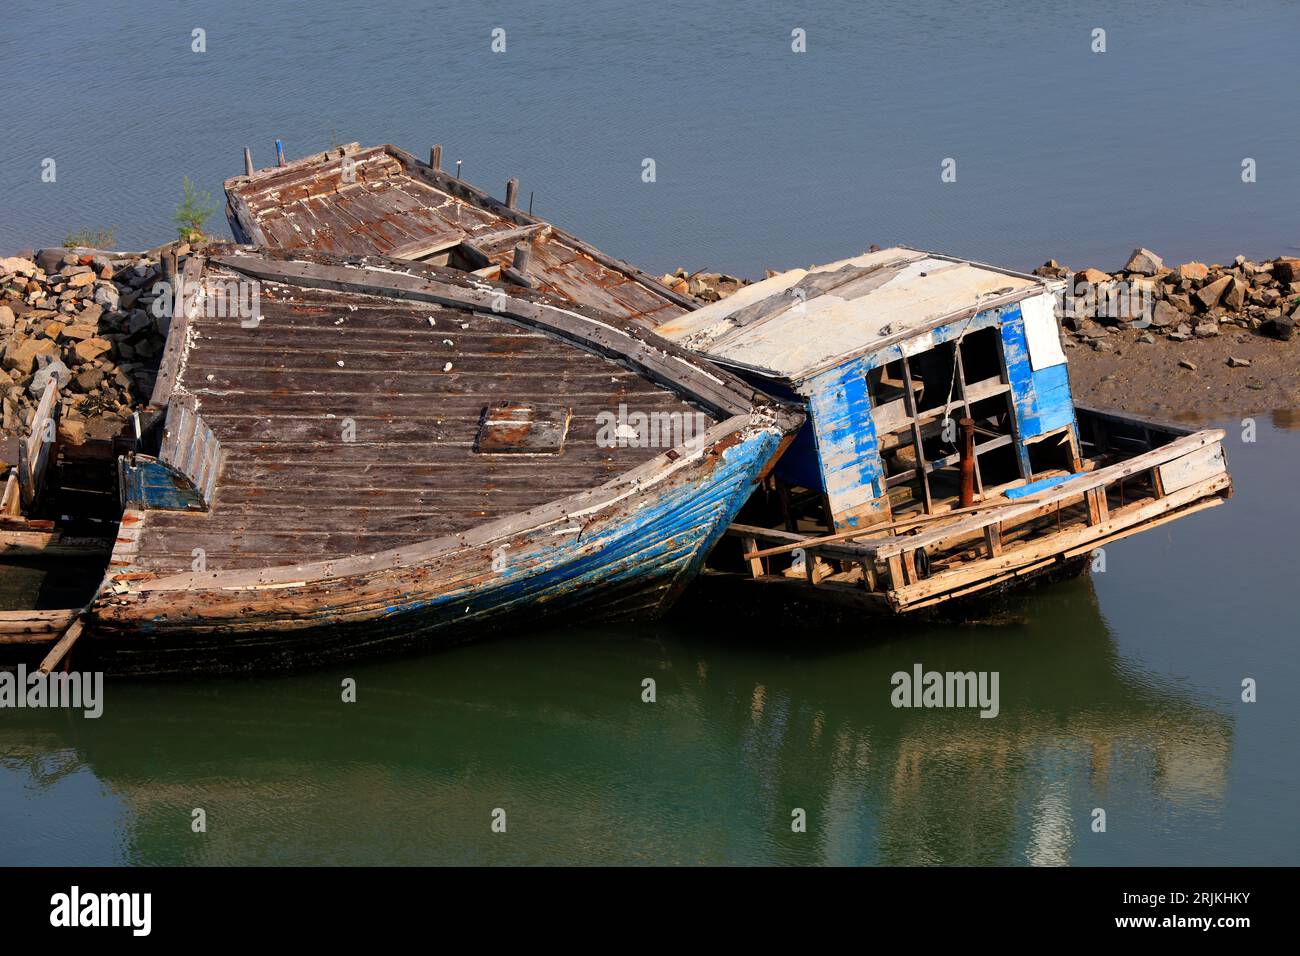 Wrecked wooden fishing boat wreckage Stock Photo